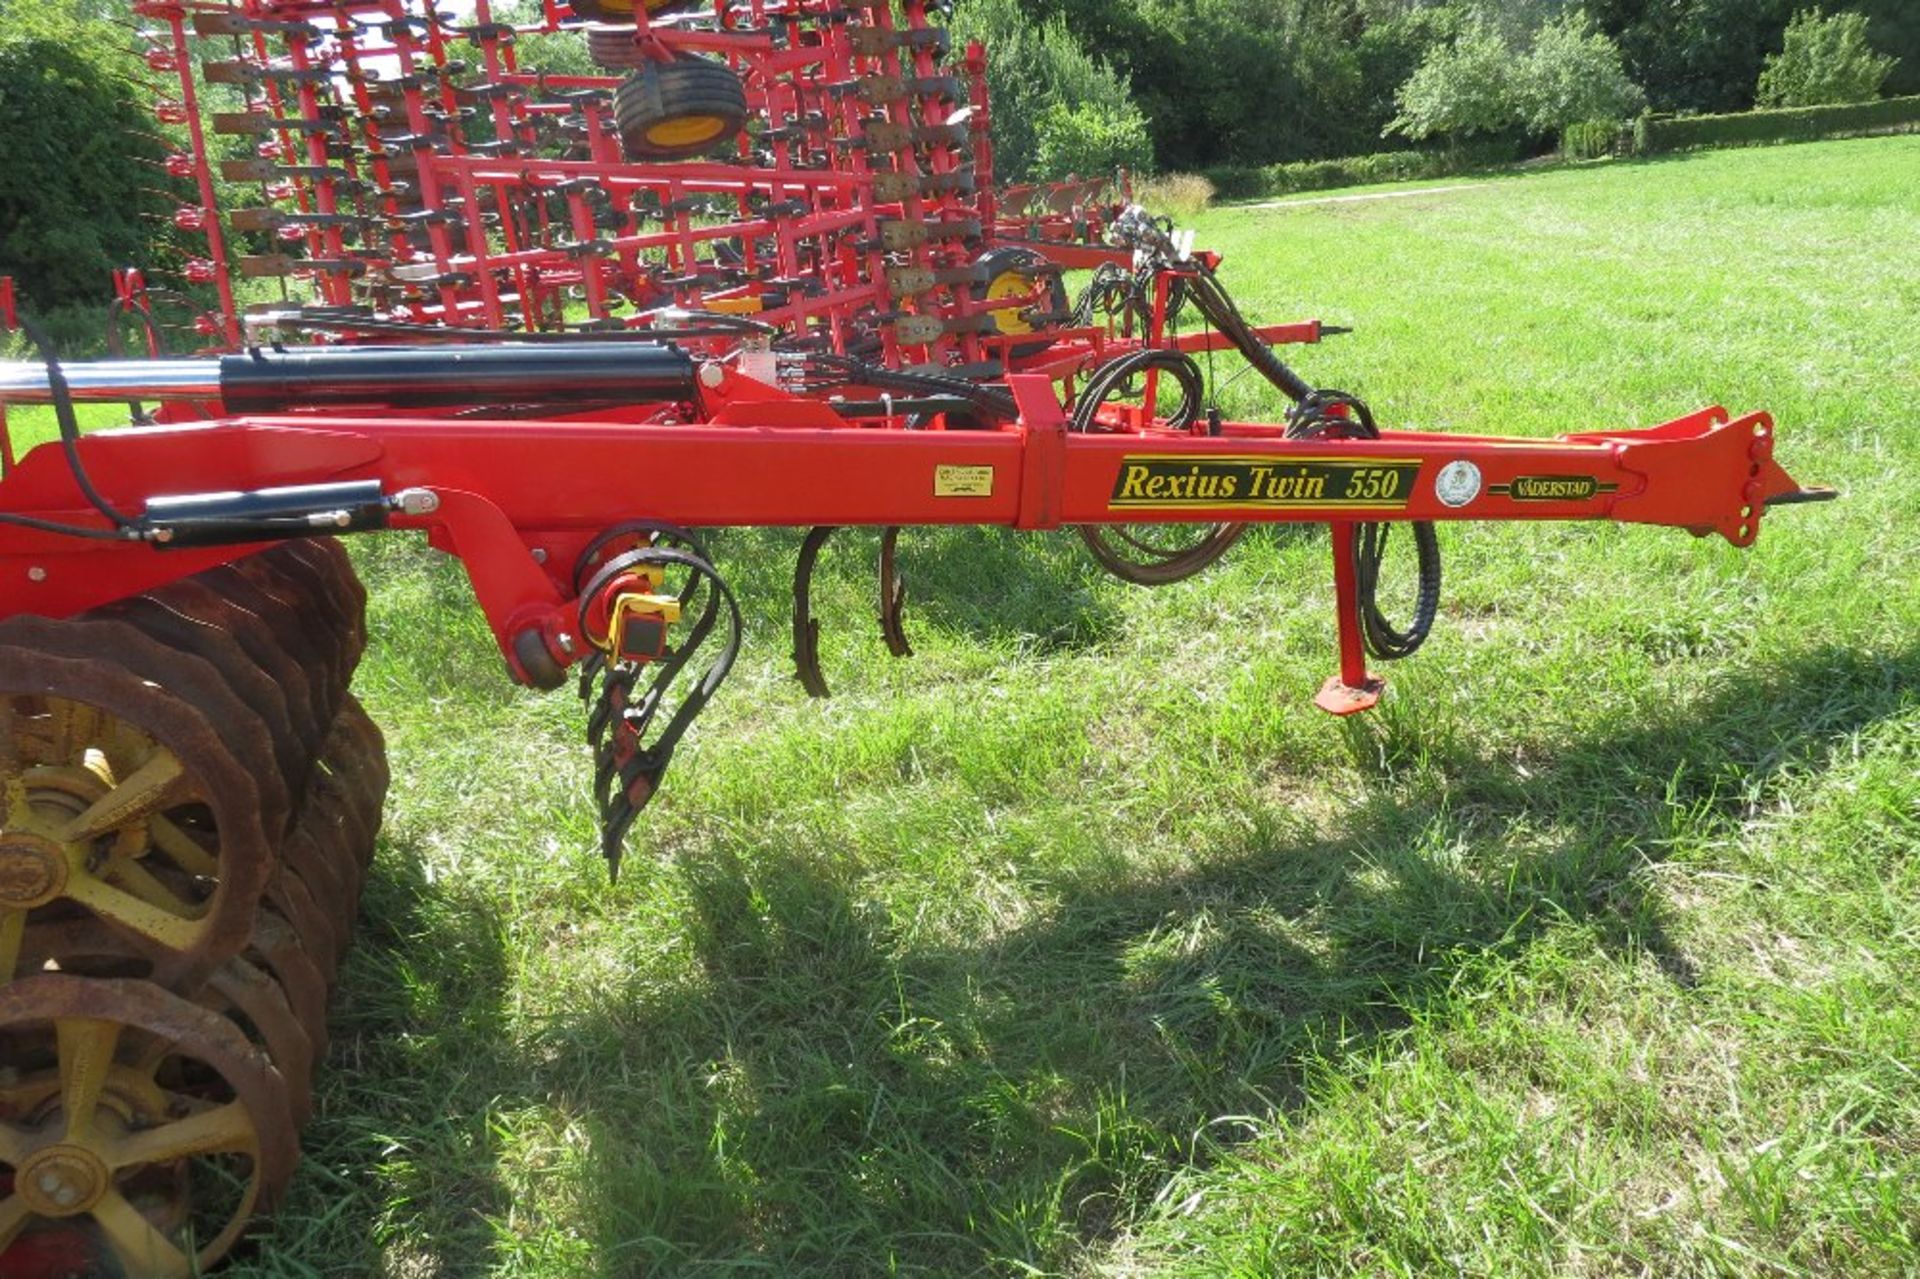 2011 Vaderstad Rexius Twin RST 550 Cultivator, working width 5. - Image 10 of 14